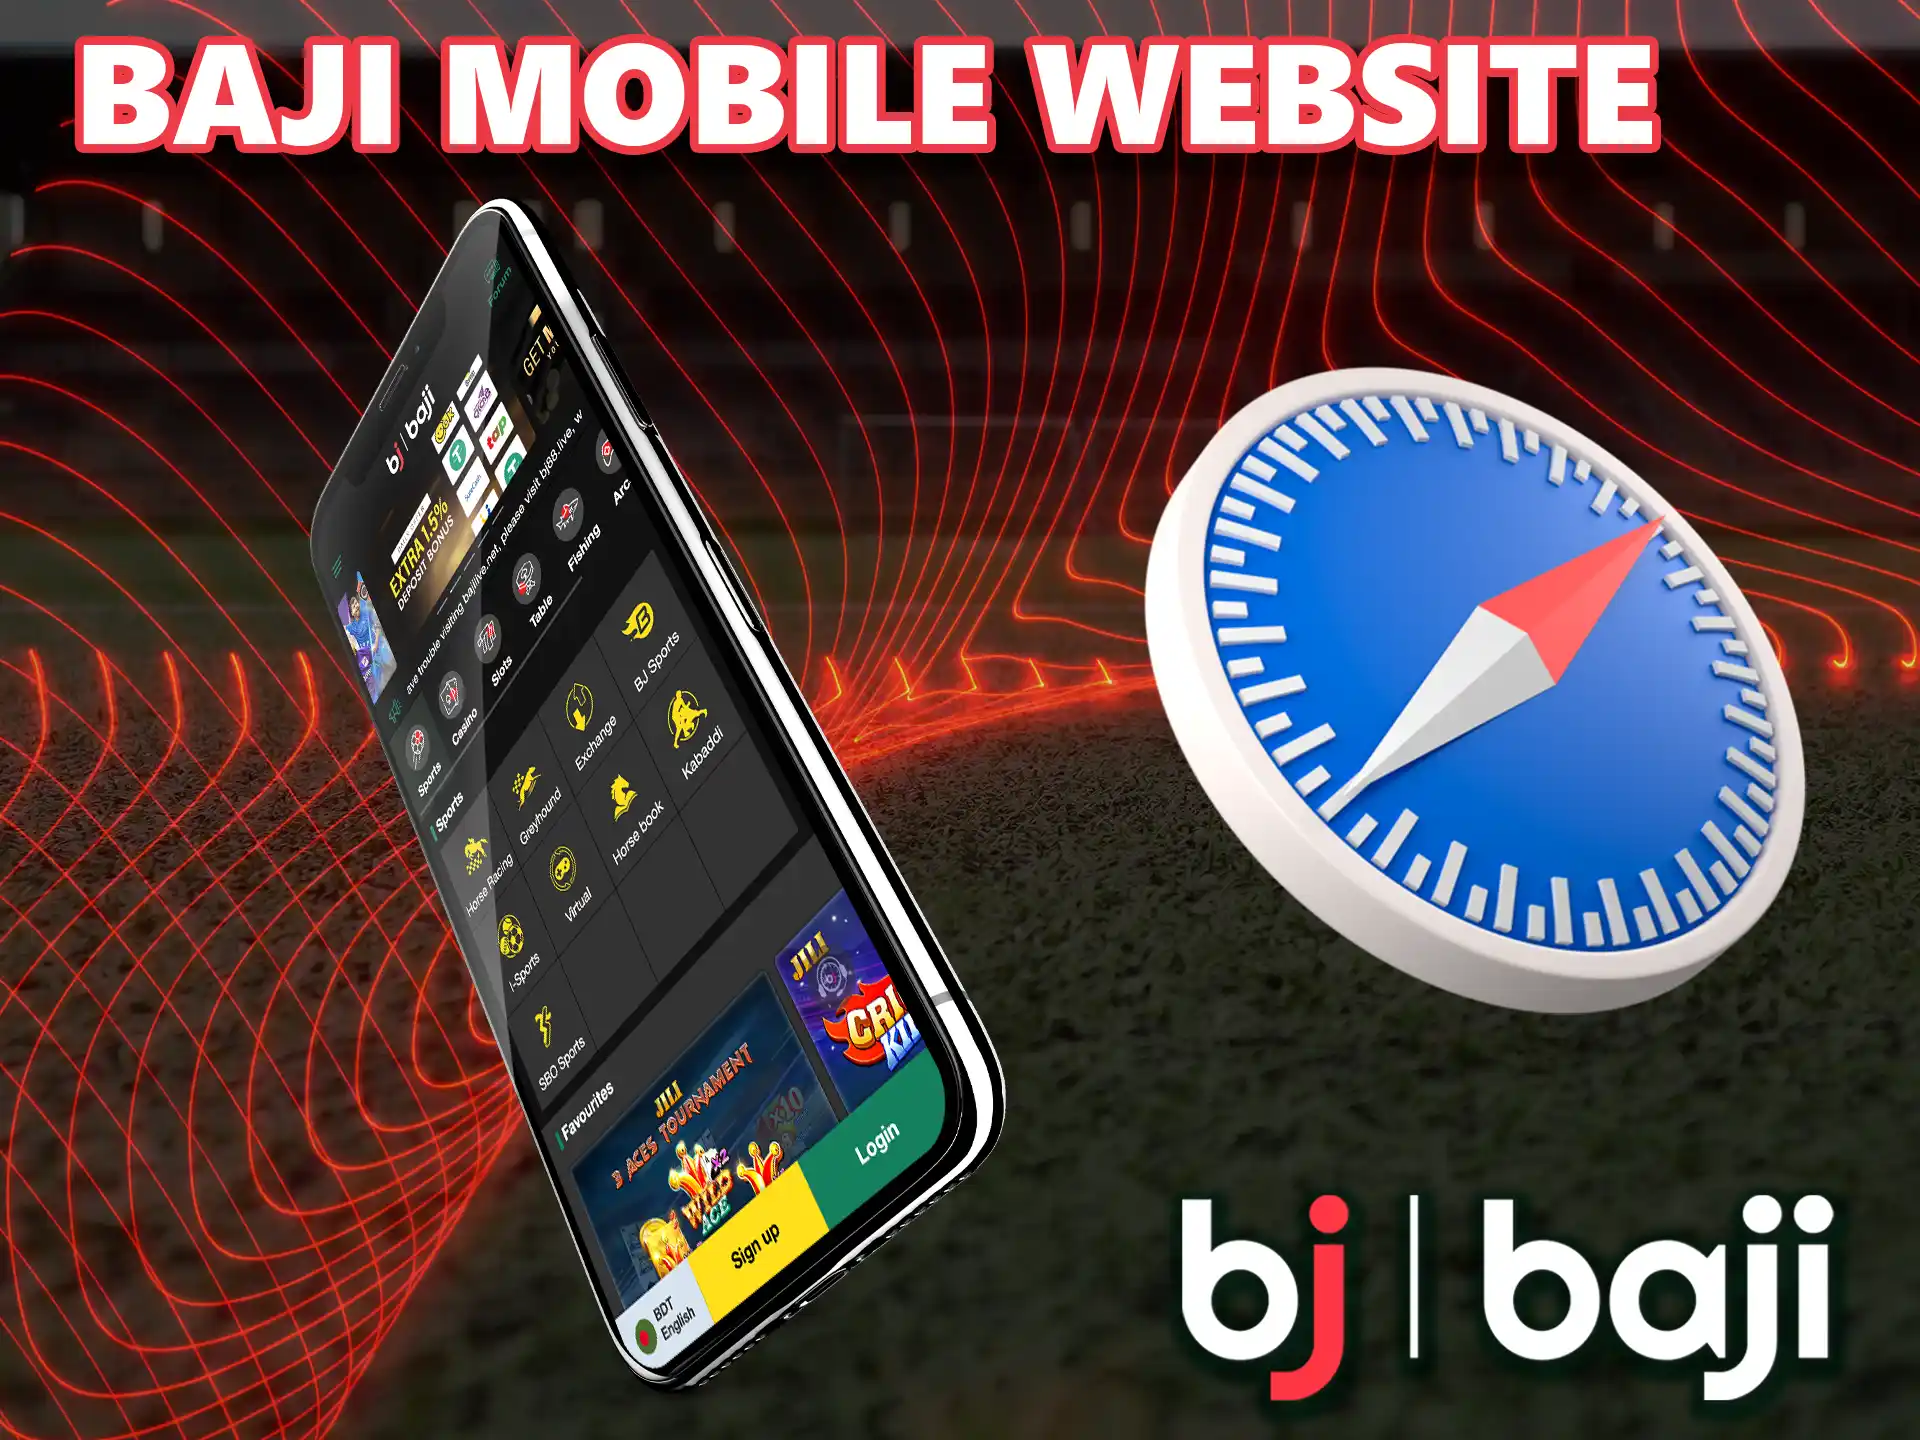 If your smartphone is not compatible with the application - this option from Baji will help you enjoy the game.